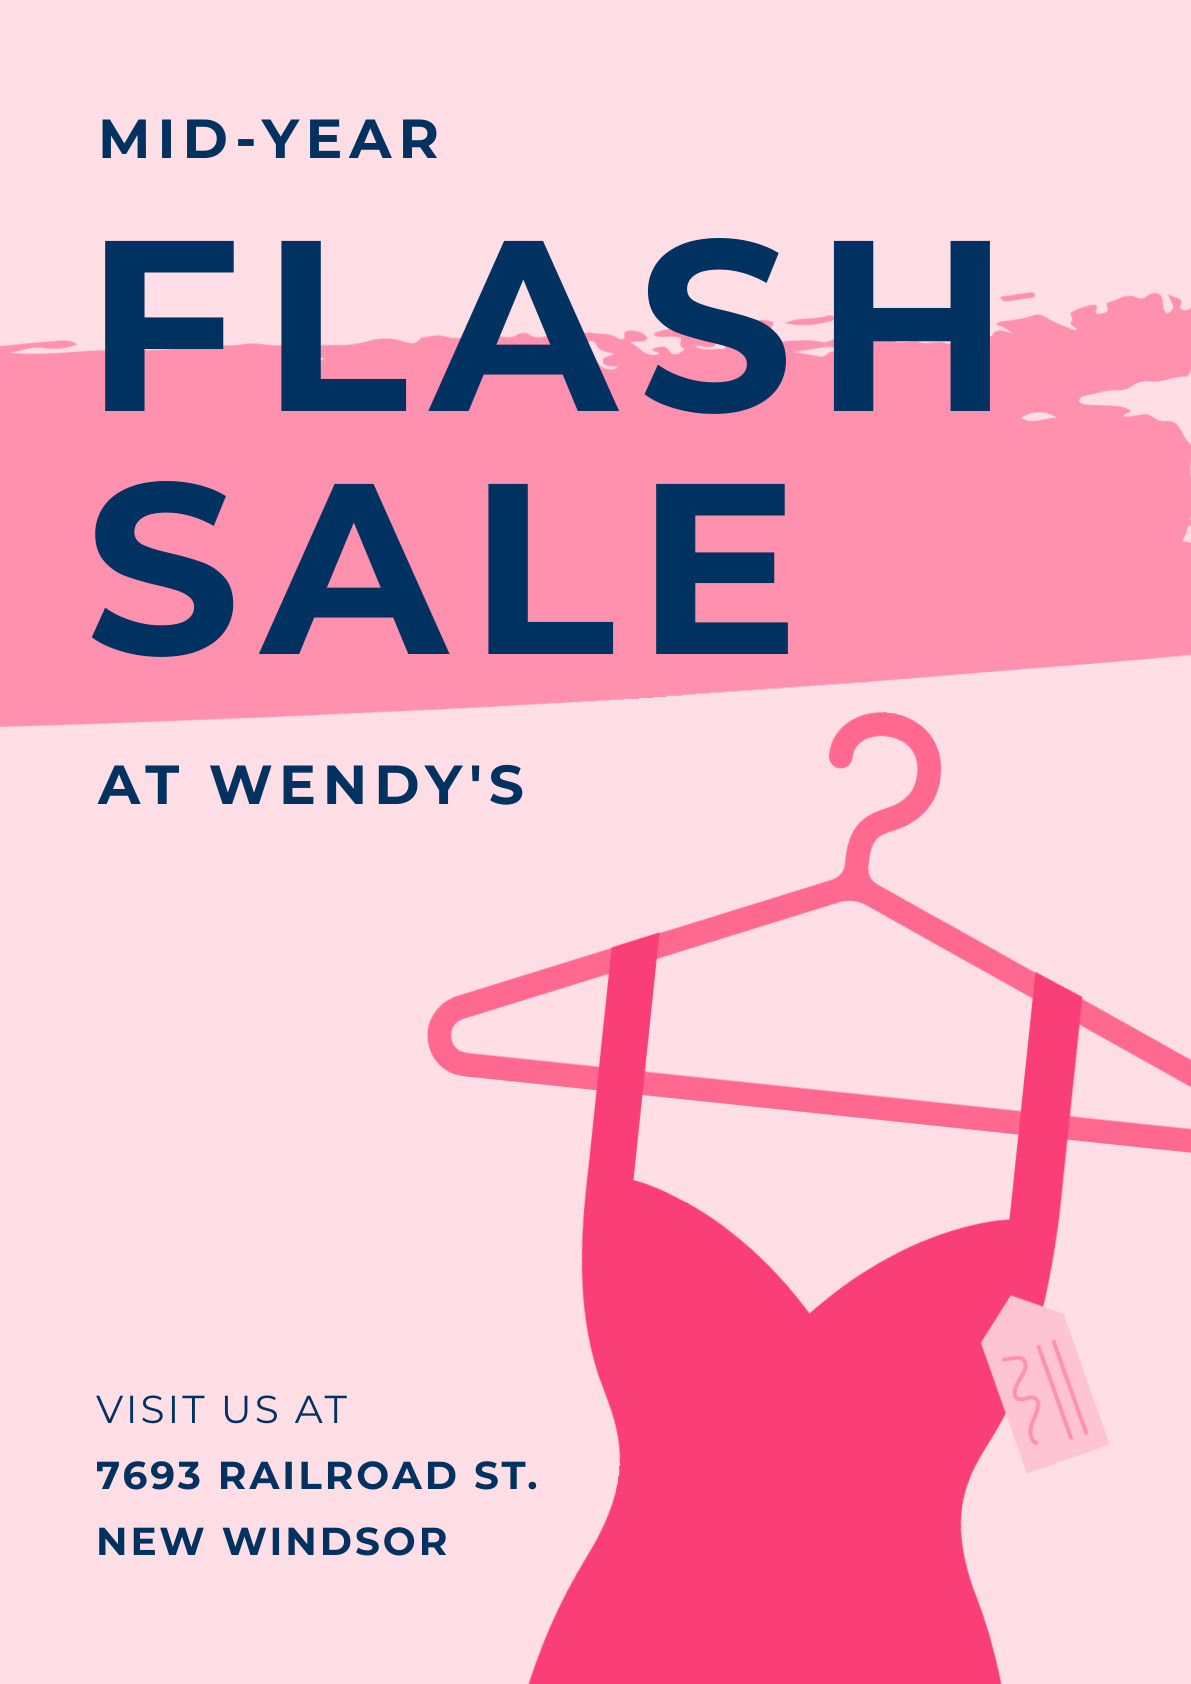 Mid-year Flash Clothes Sale – Poster Template 1191x1684